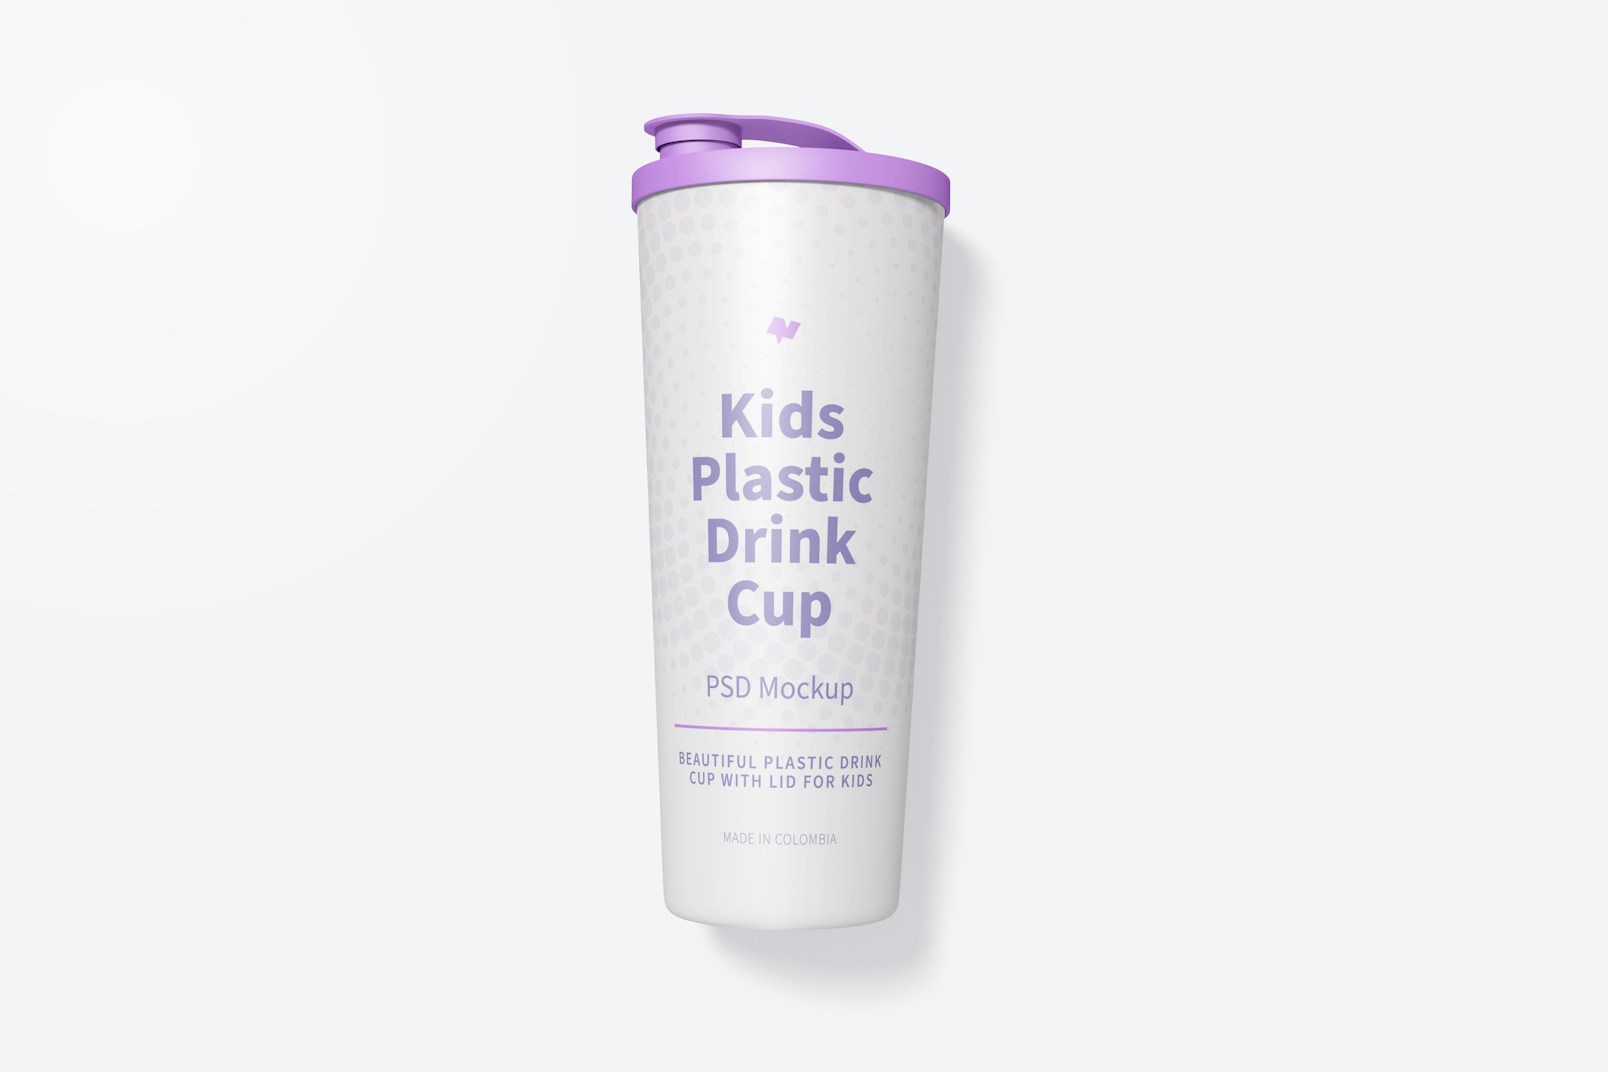 Kids Plastic Drink Cup With Lid Mockup, Top View